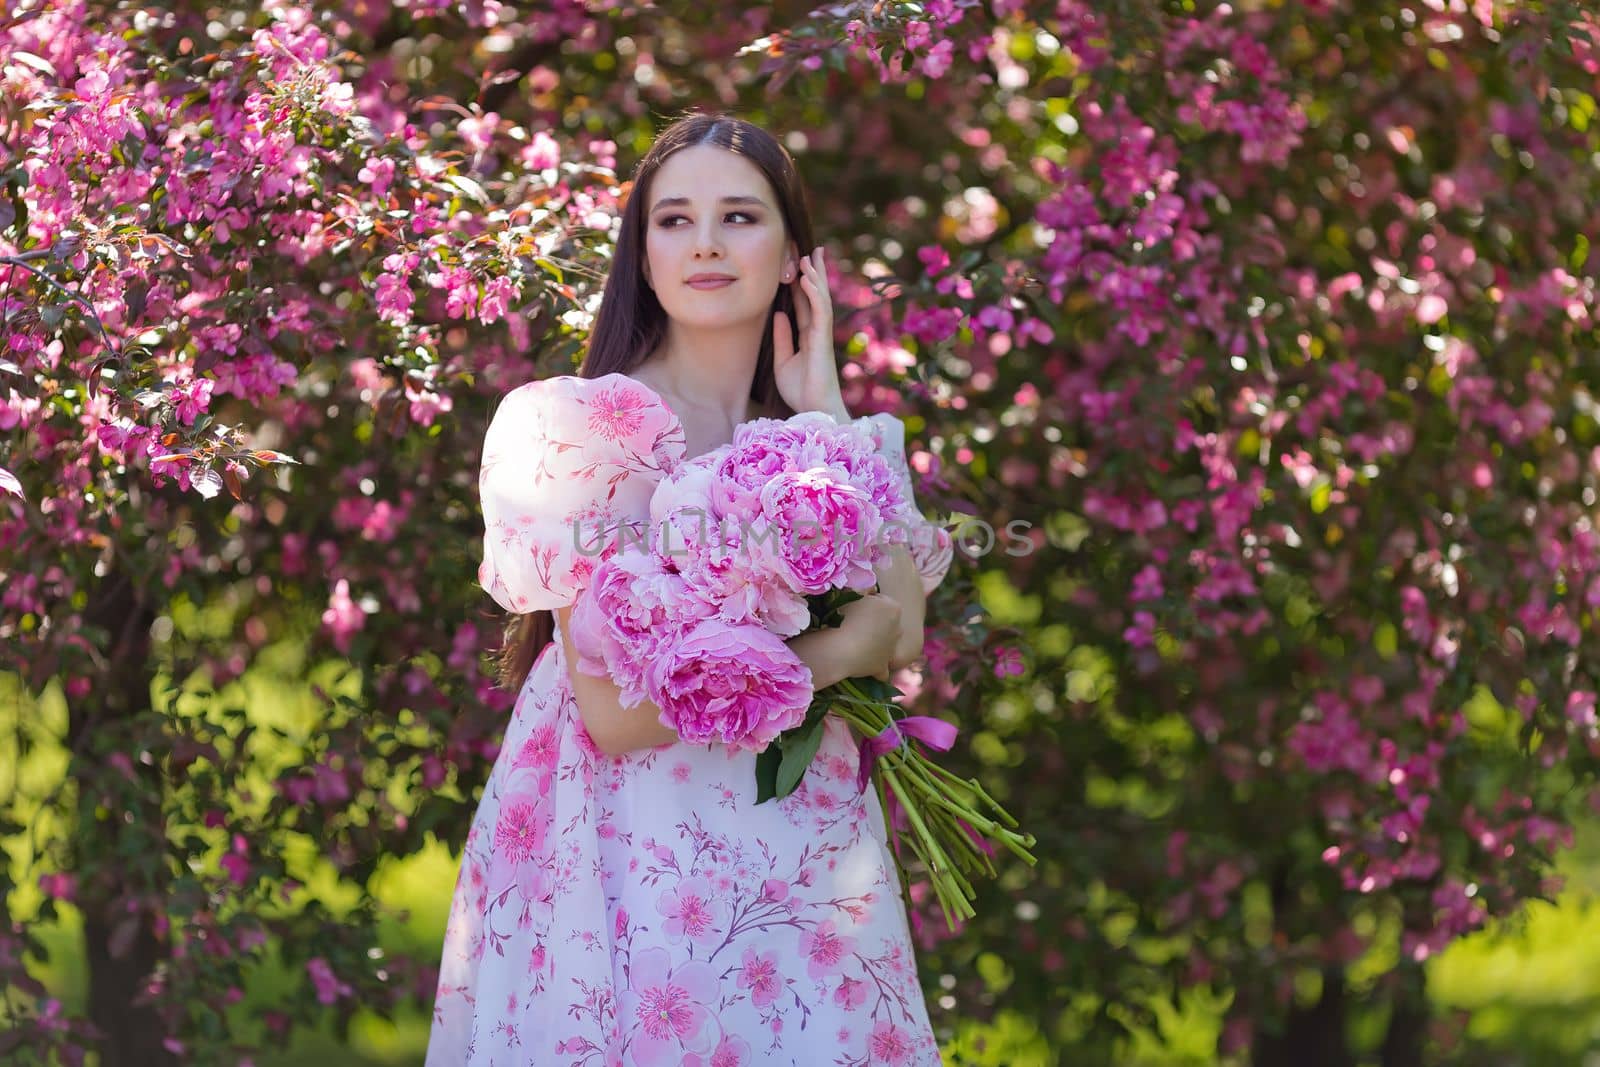 A pretty brunette in a dress, with a large bouquet of peonies, stands near pink blooming apple trees by Zakharova